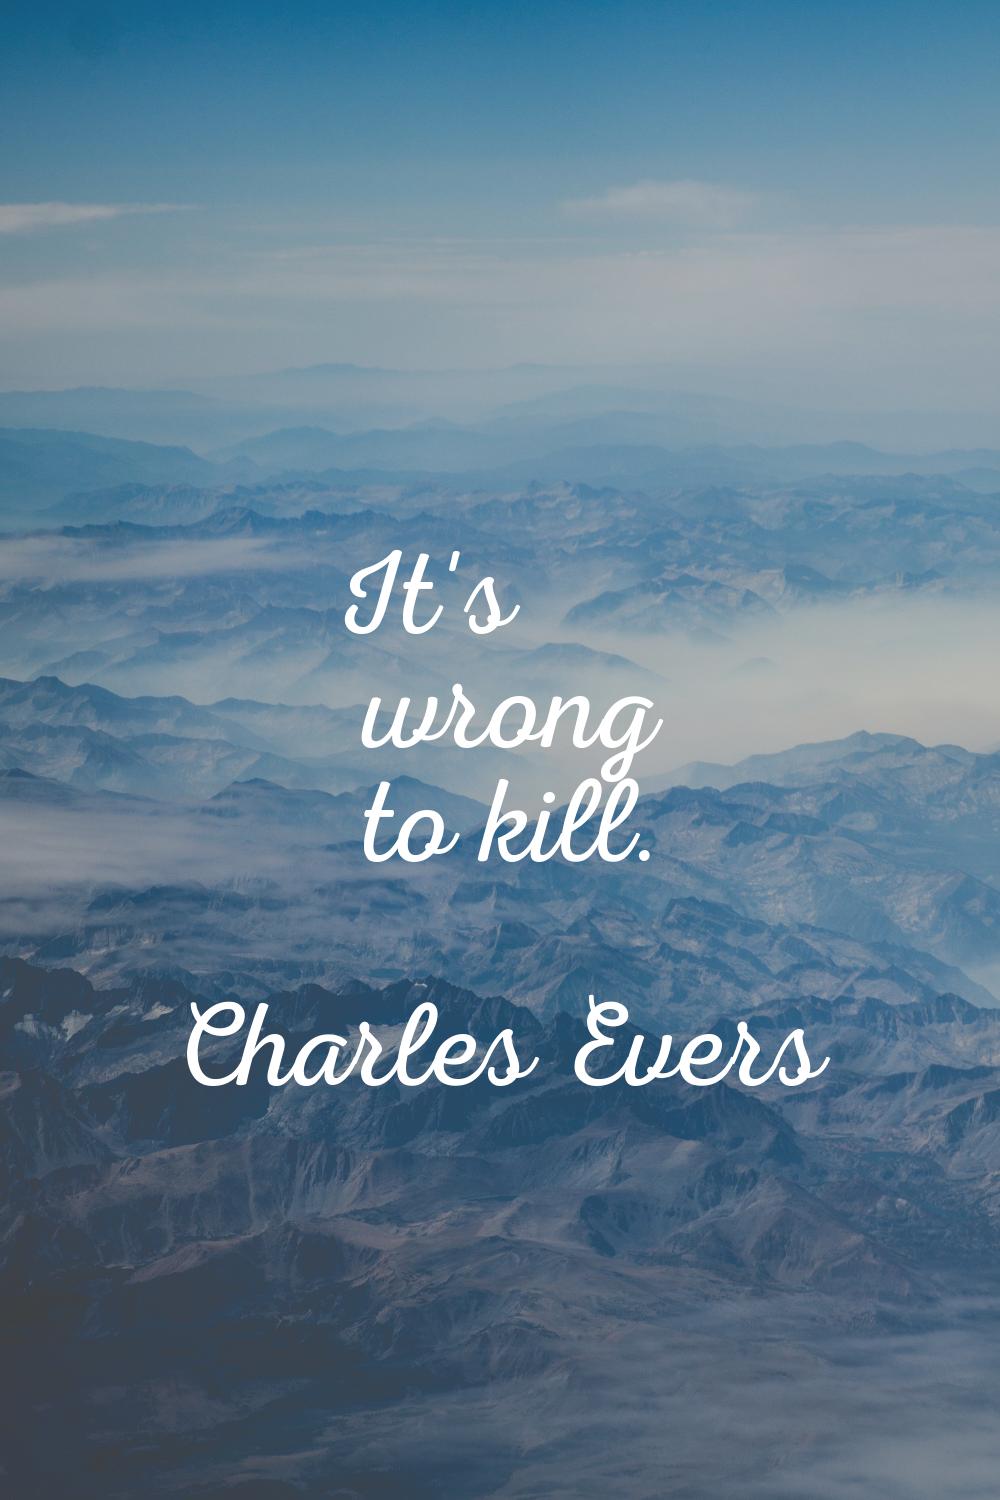 It's wrong to kill.